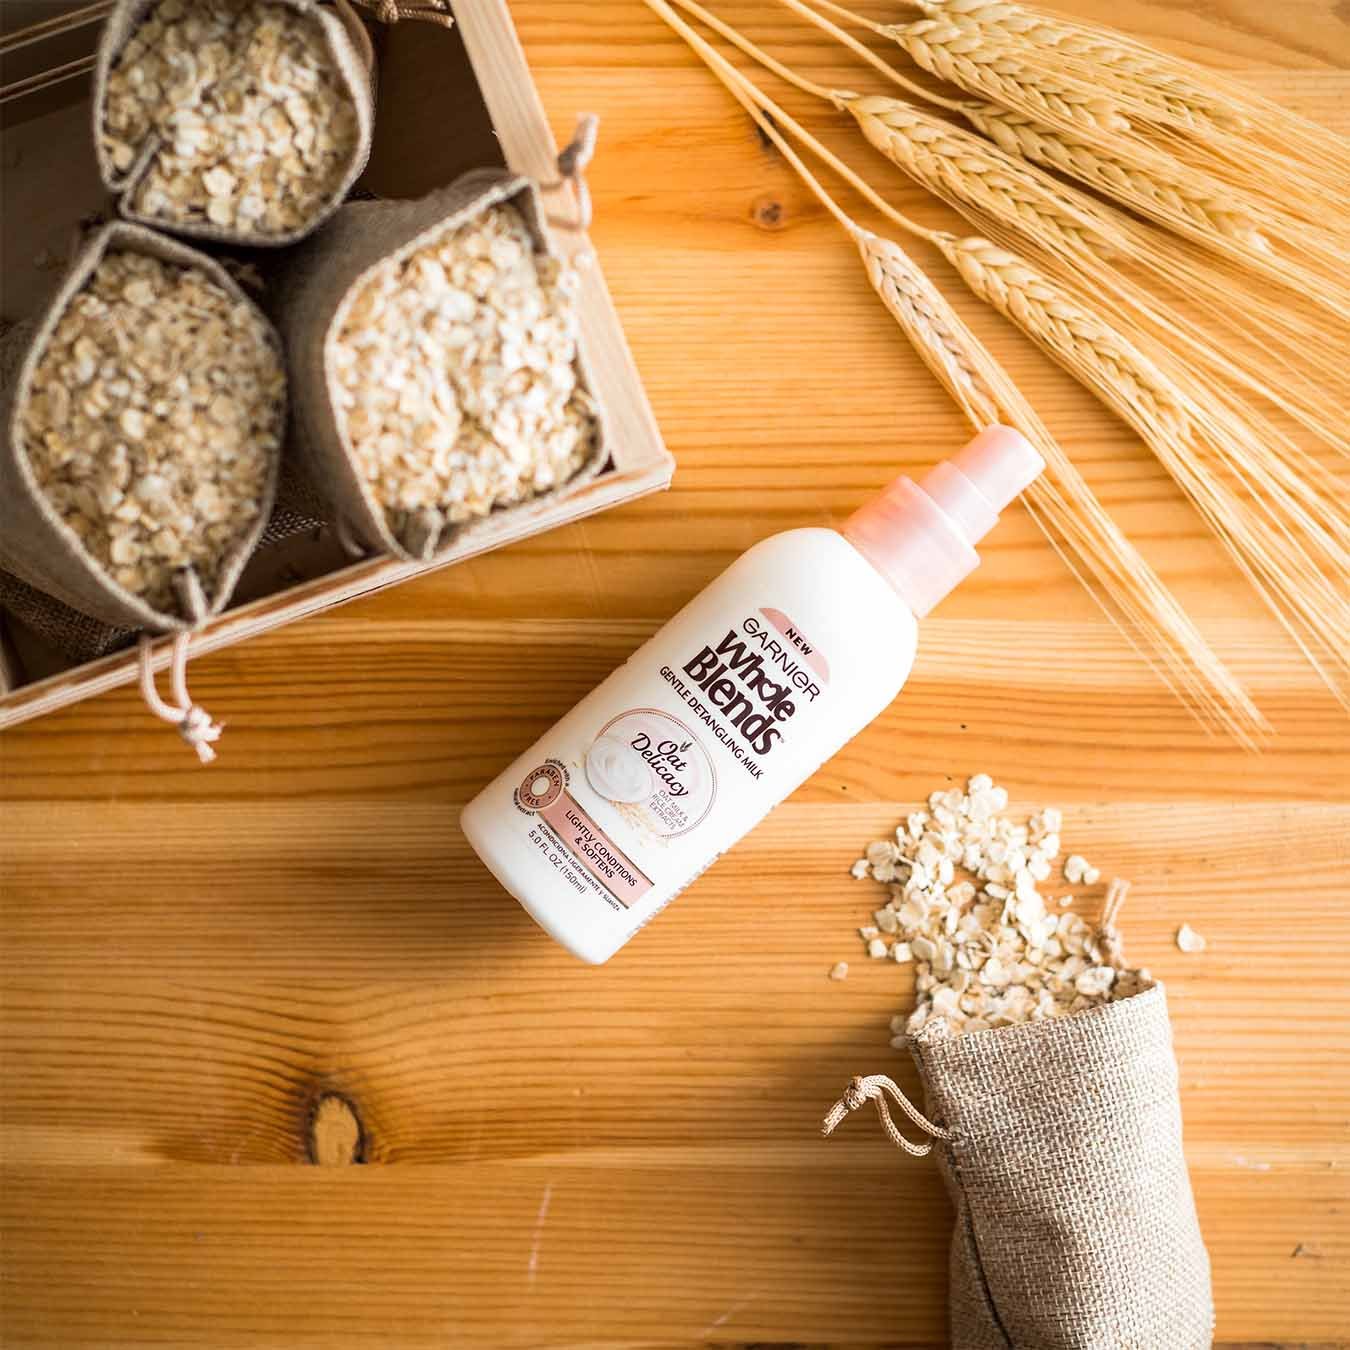 Whole Blends Oat Delicacy Gentle Detangling Milk on a wooden table with wheat stalks and a crate of small burlap sacks of oats, one of which has spilled.